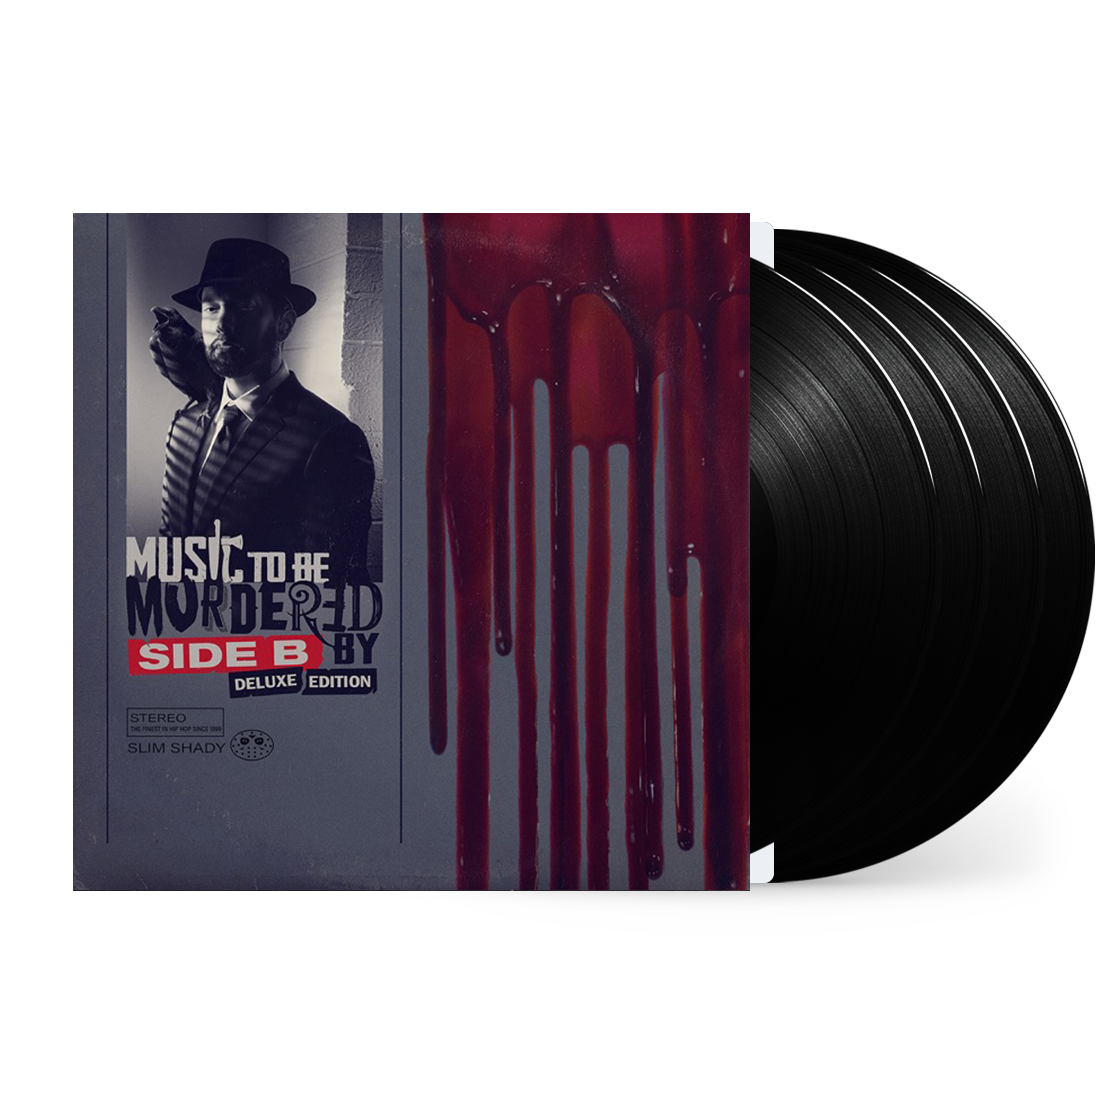 Music To Be Murdered By - Side B (Deluxe Edition): Vinyl 4LP